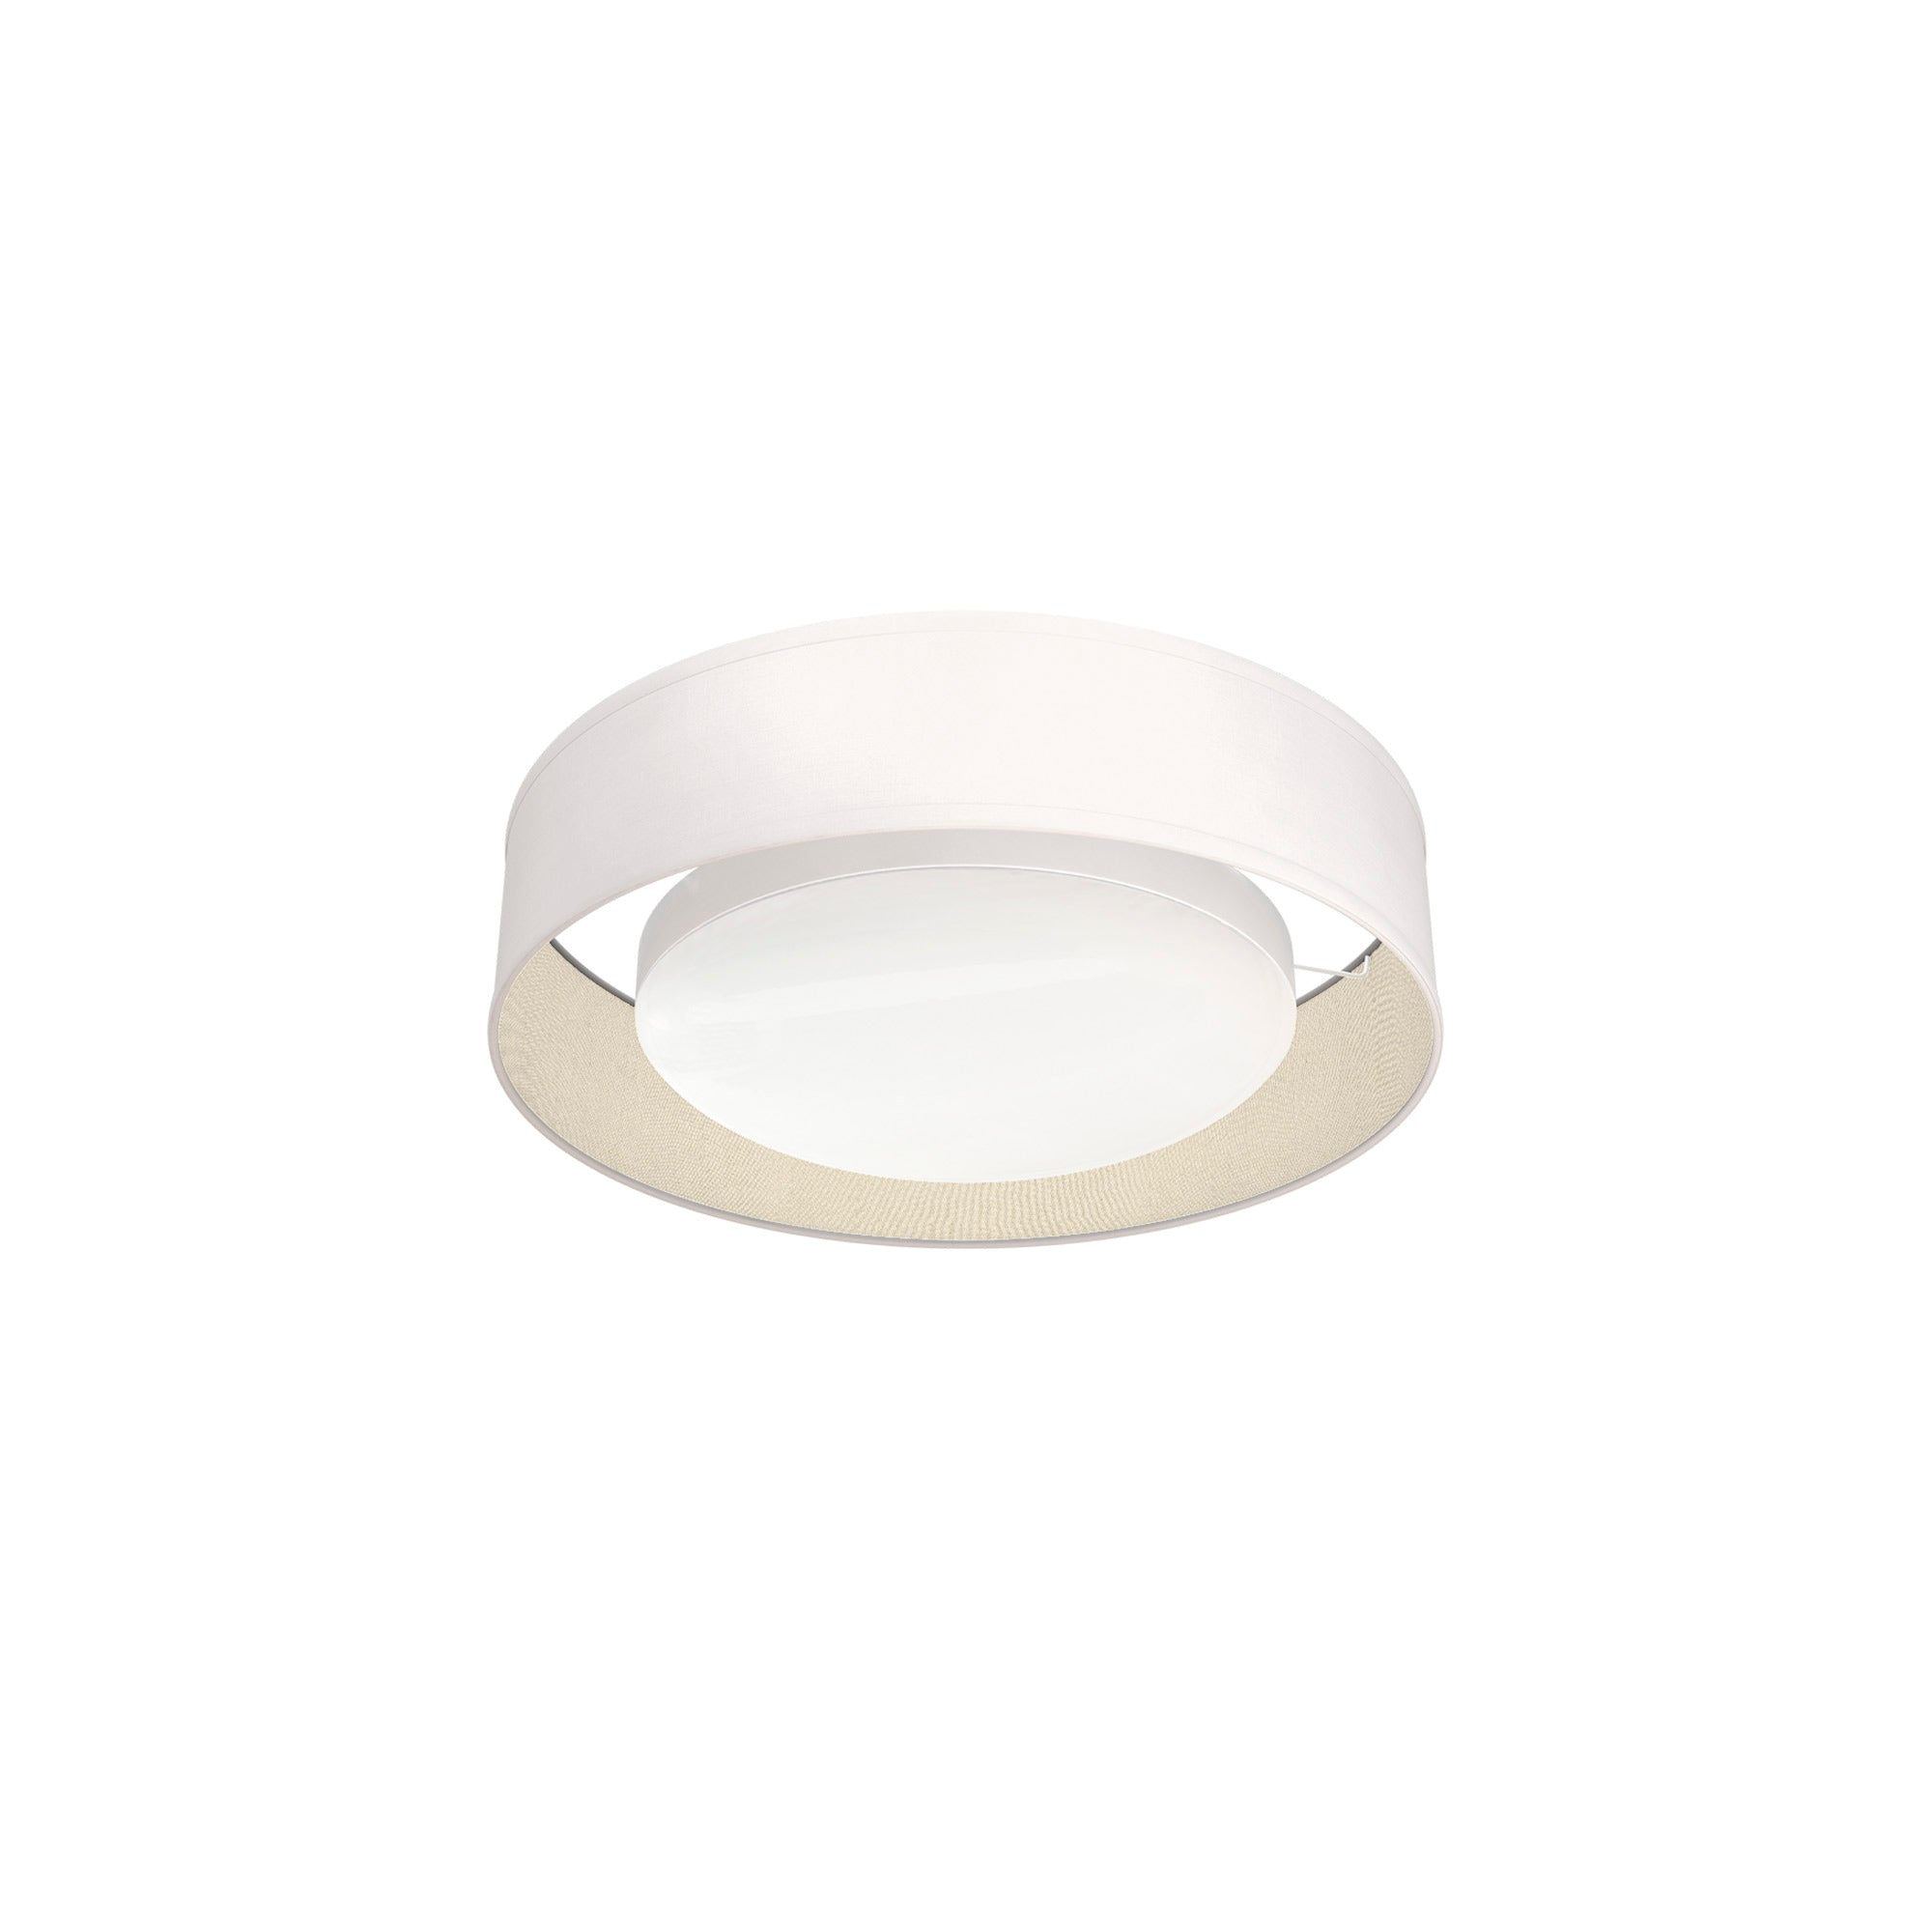 The Vinny Flush Mount from Seascape Fixtures with a silk shade in cream color.